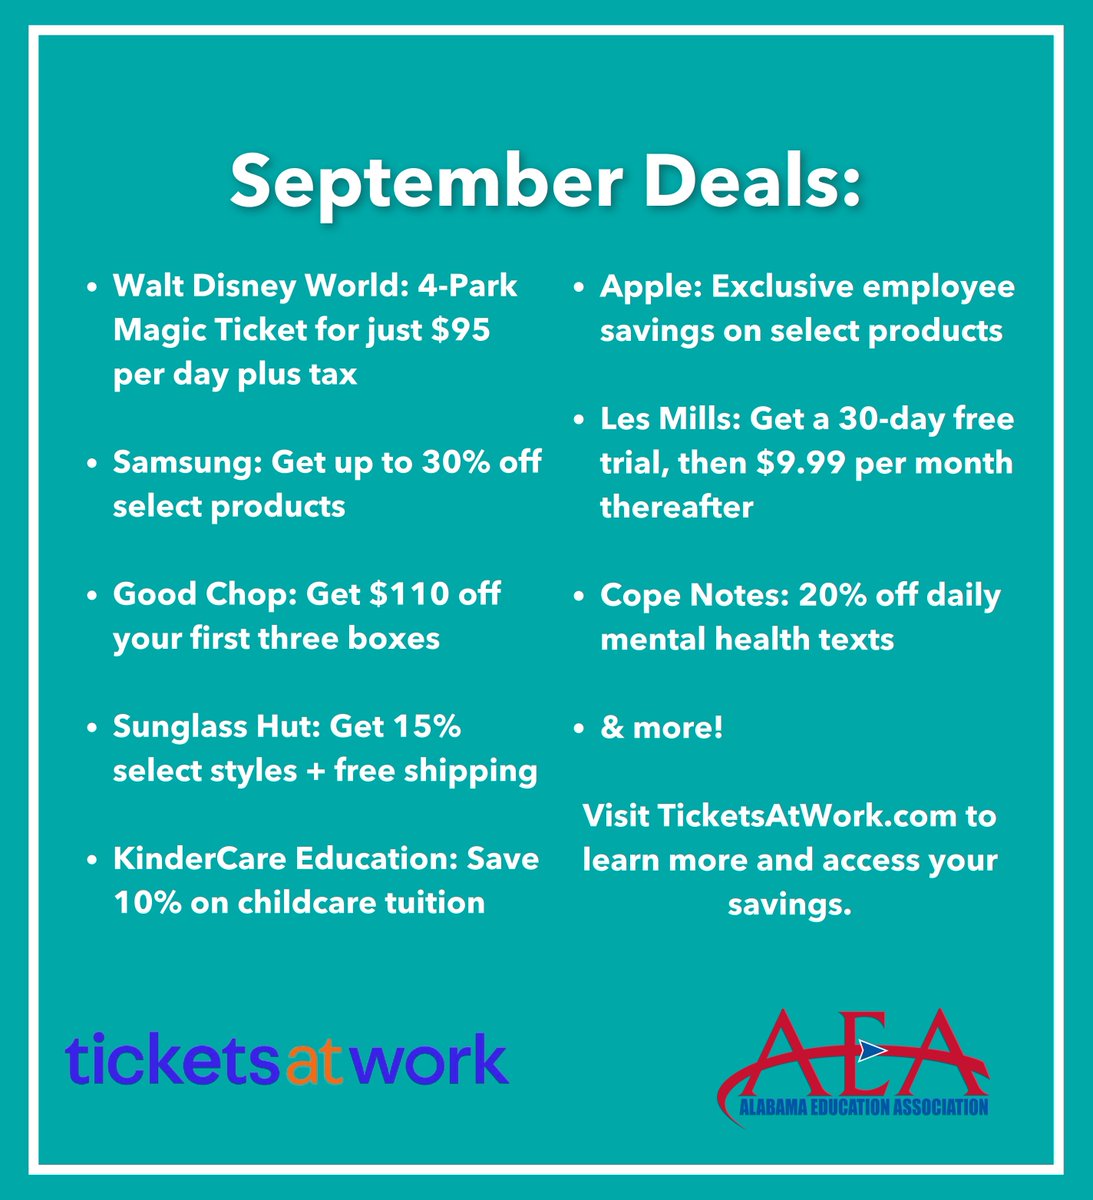 AEA members! This September, take advantage of the discounts made available by your membership. These are just some of the deals that TicketsAtWork is offering as the seasons change. Visit TicketsAtWork.com to learn more! #myAEA